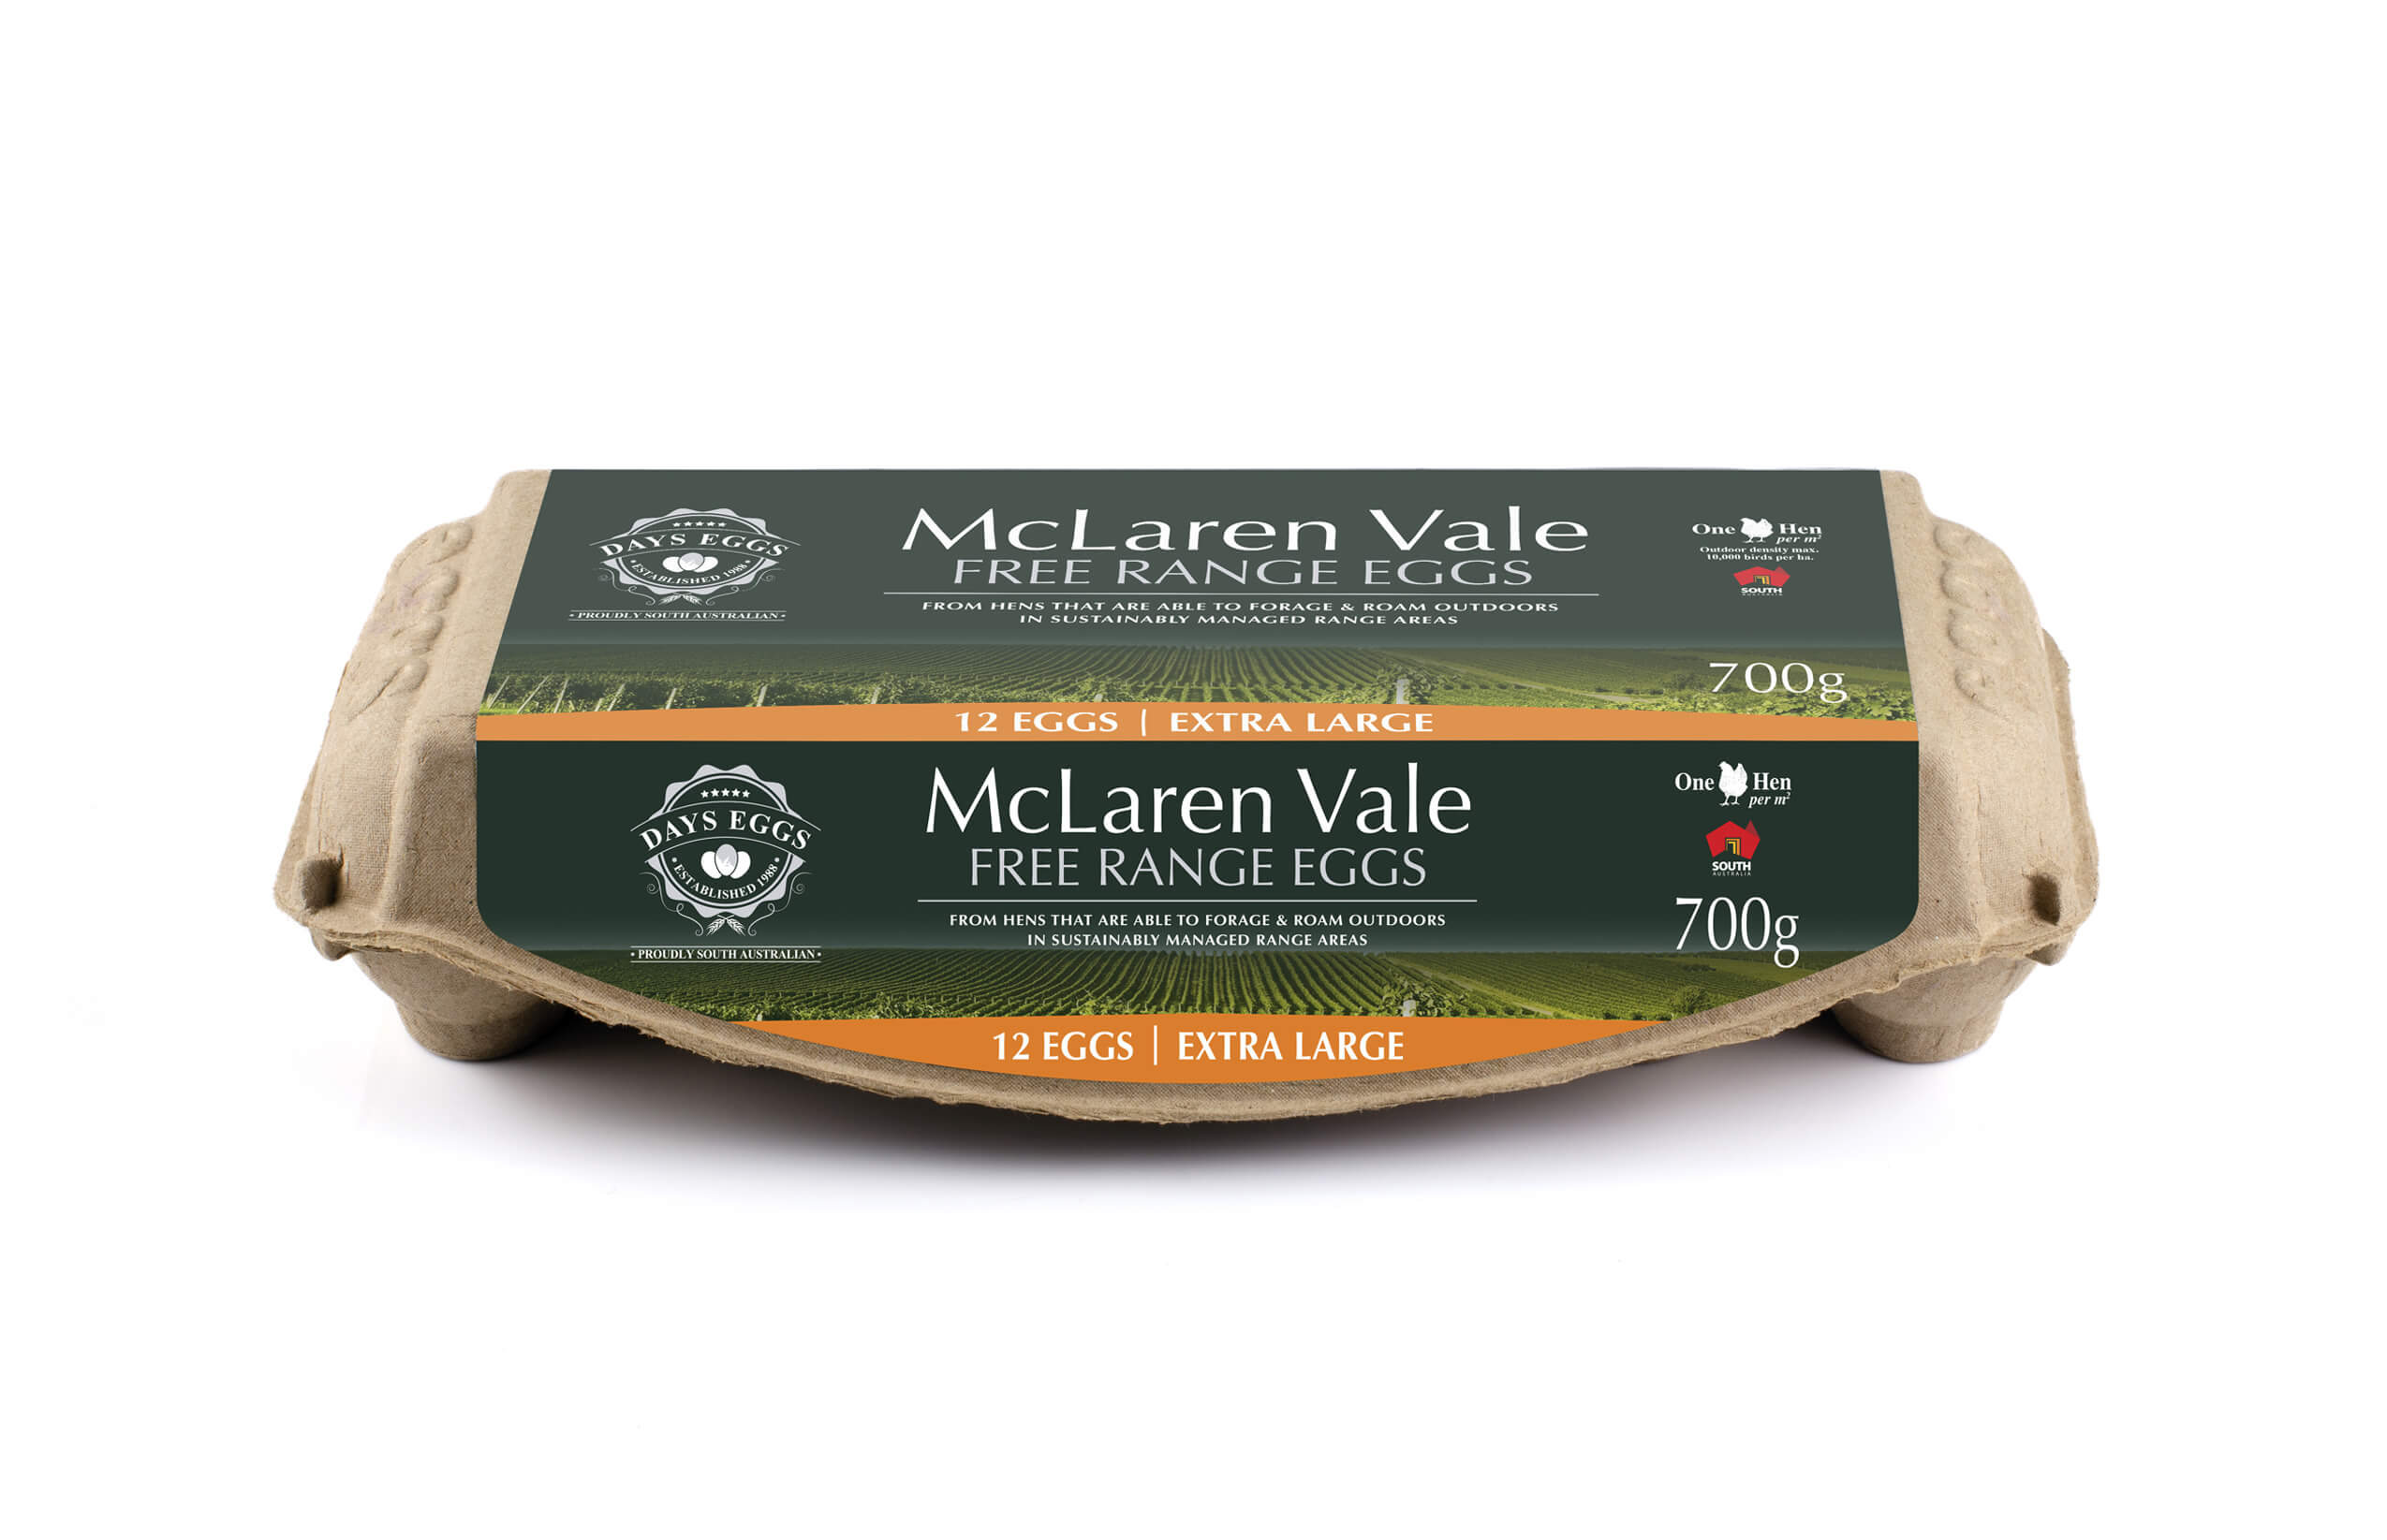 Icon Graphic Design - Label and packaging design Adelaide image of Days Eggs McLaren Vale 700g 12 egg carton.